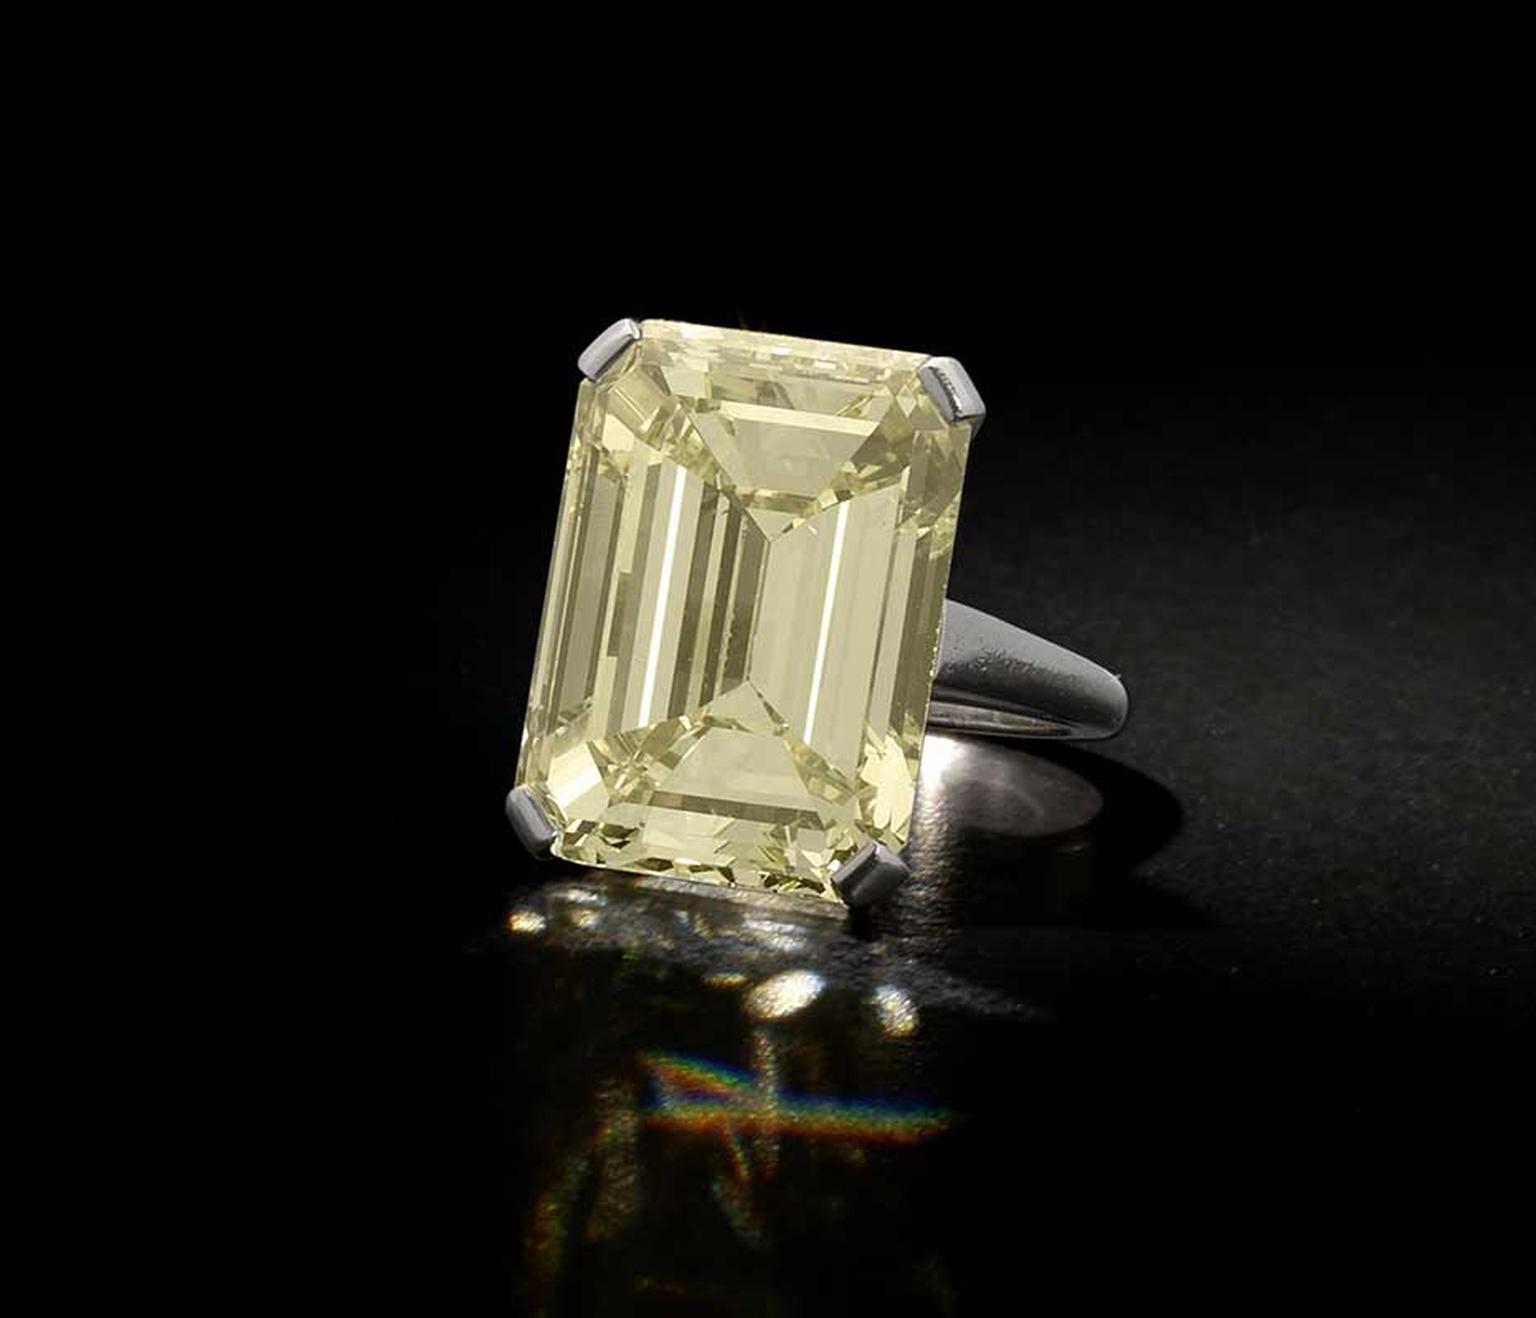 Lot 187, a yellow diamond ring, set with a step-cut Fancy Yellow diamond weighing 24.59ct (estimate: £150,000-£250,000)